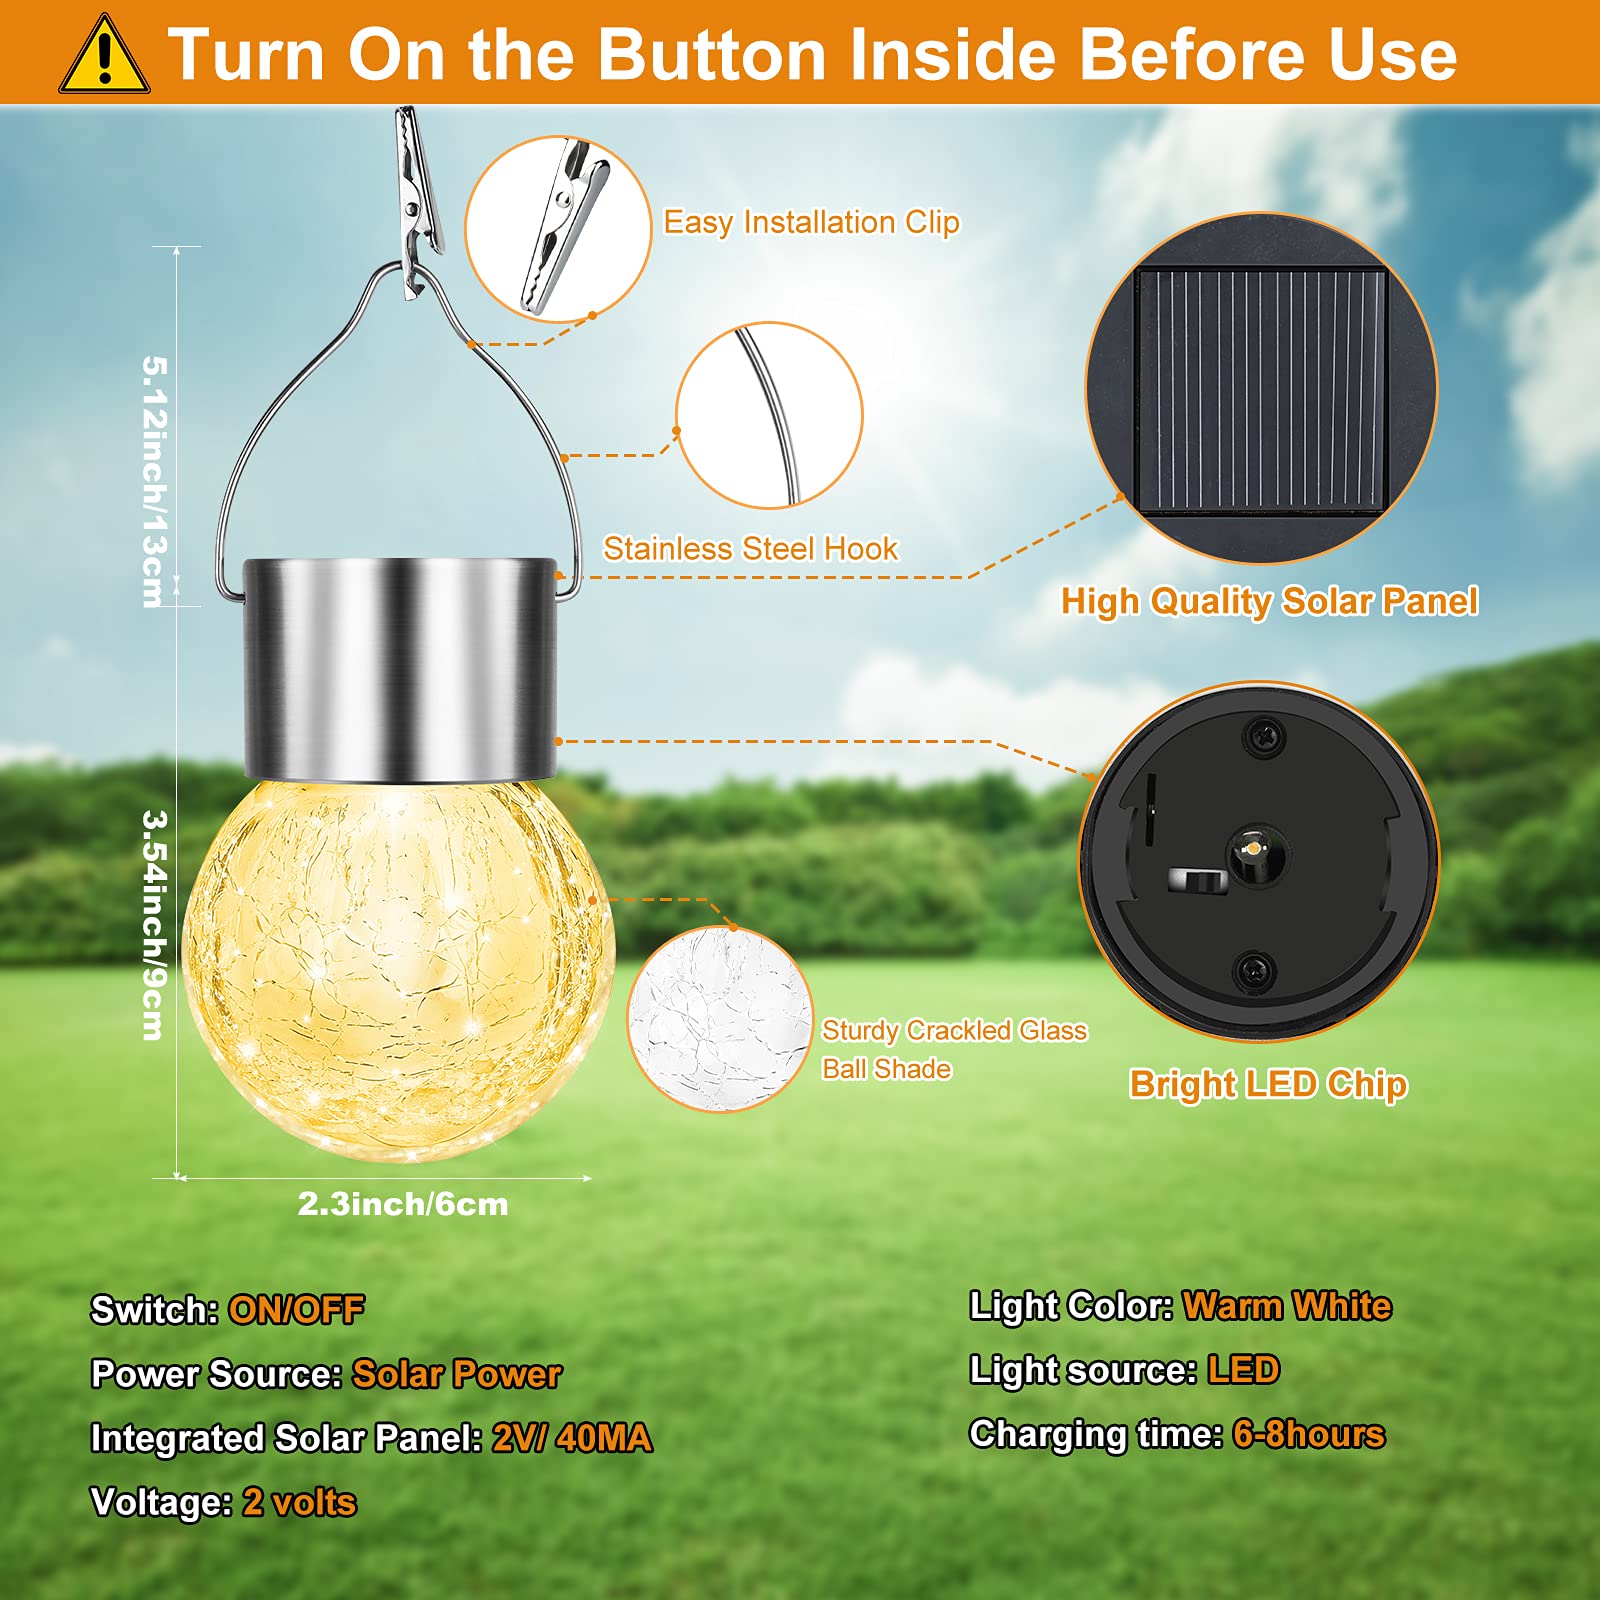 12Pack Hanging Outdoor Solar Lights - Decorative Cracked Glass LED Ball Lights Waterproof Tree Solar Powered Globe Lights with Handle for Garden Yard Patio Fence Christmas Decoration, Warm White